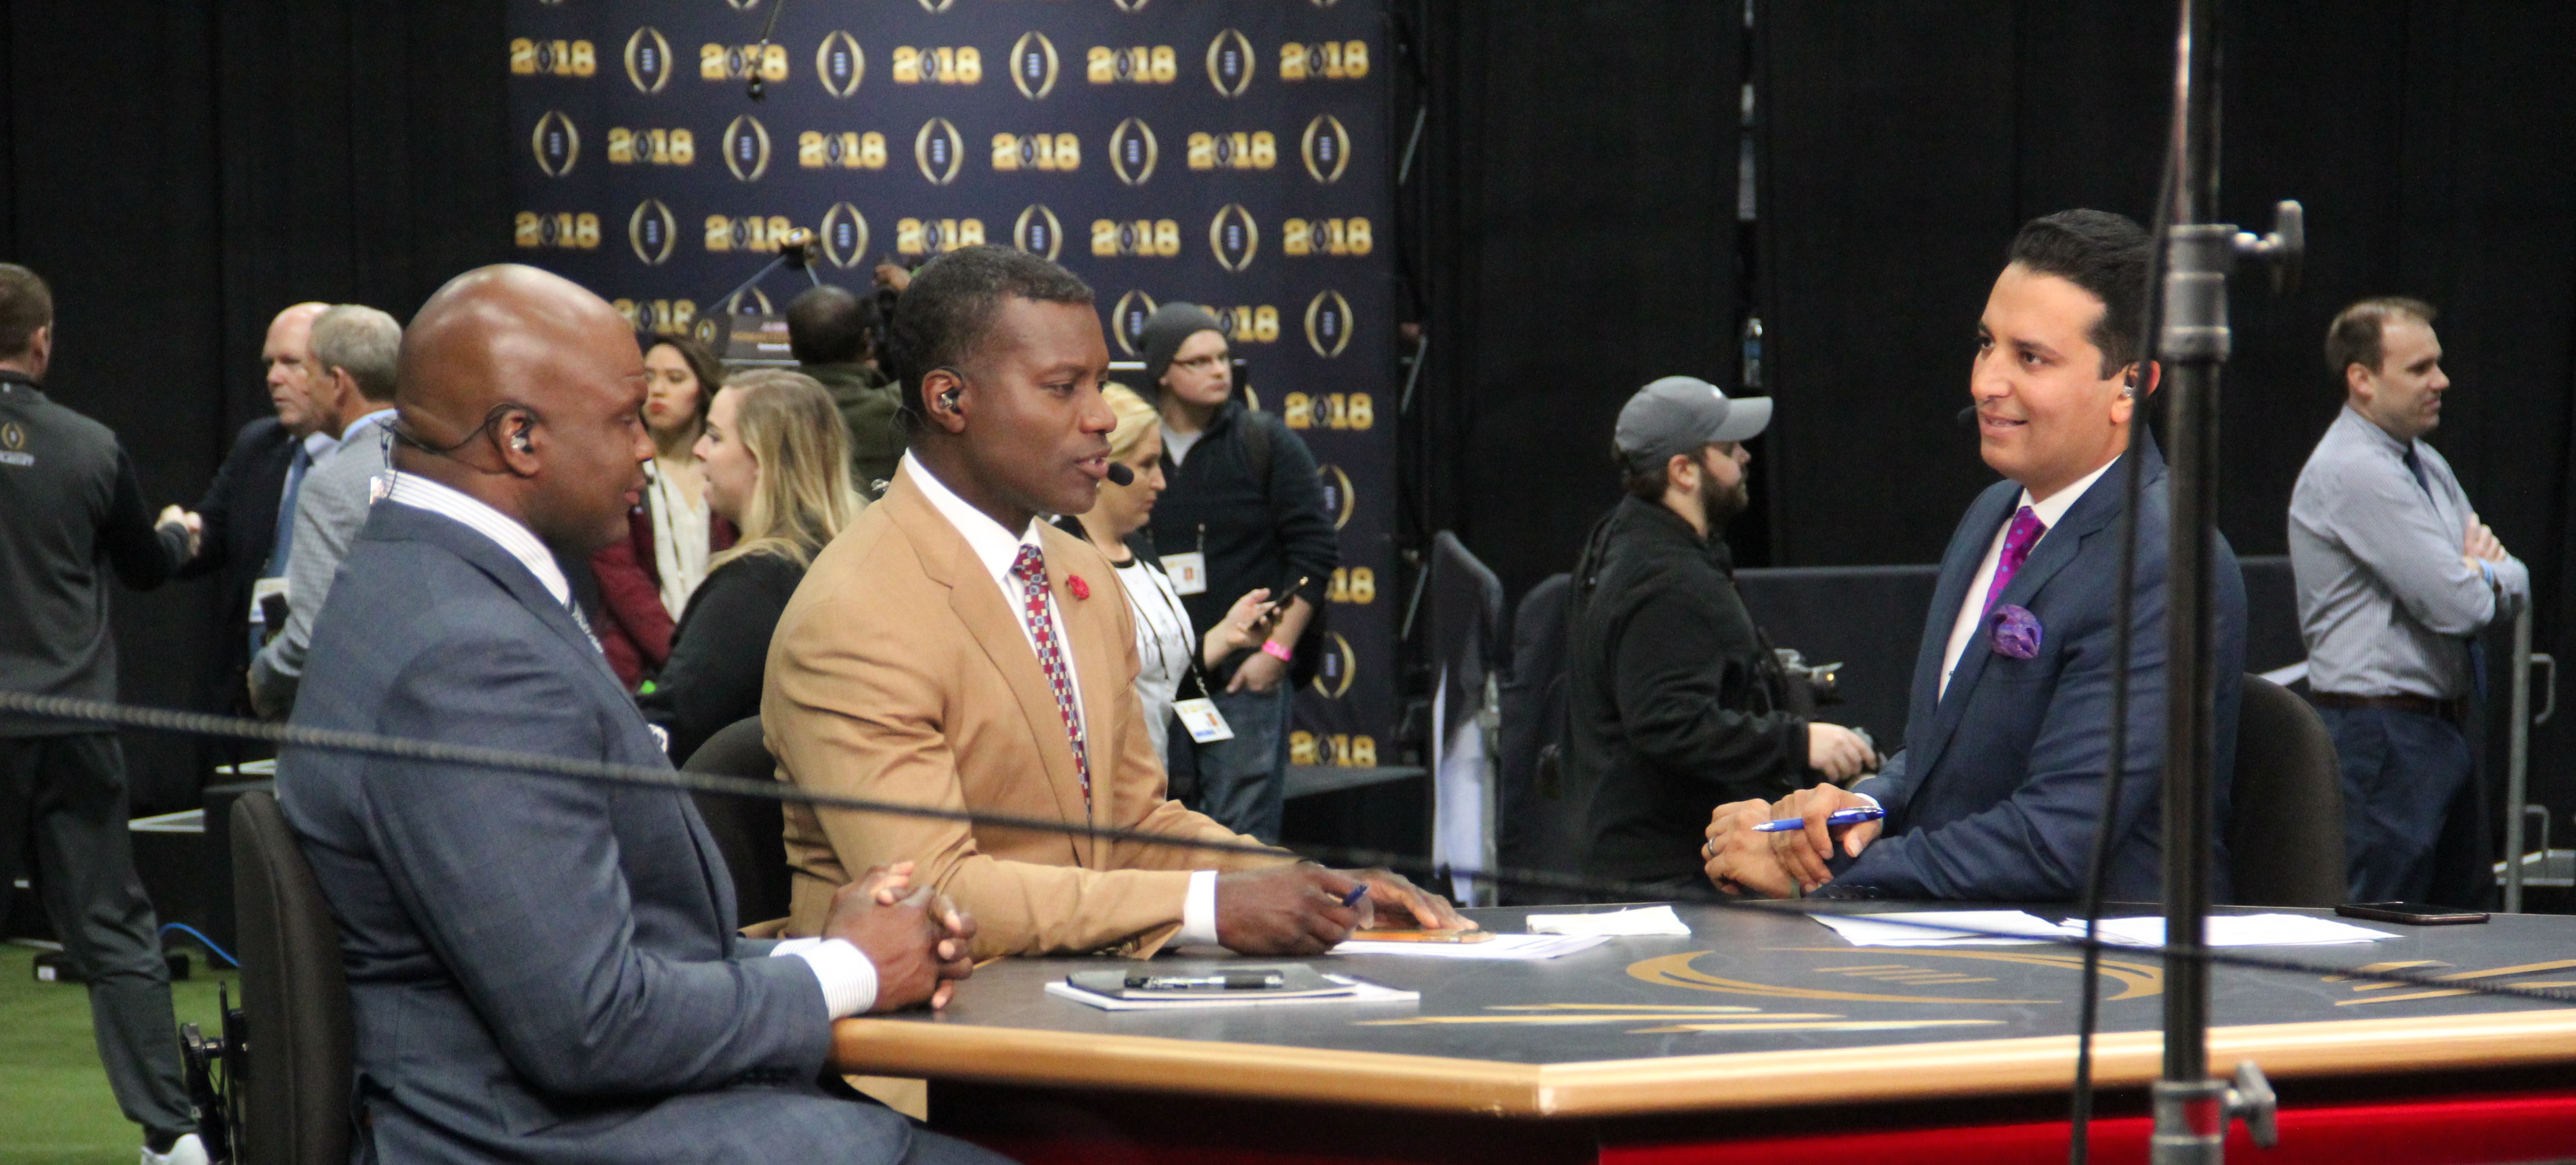 ESPN College Football set at the 2018 College Football Playoff National Championship media day.